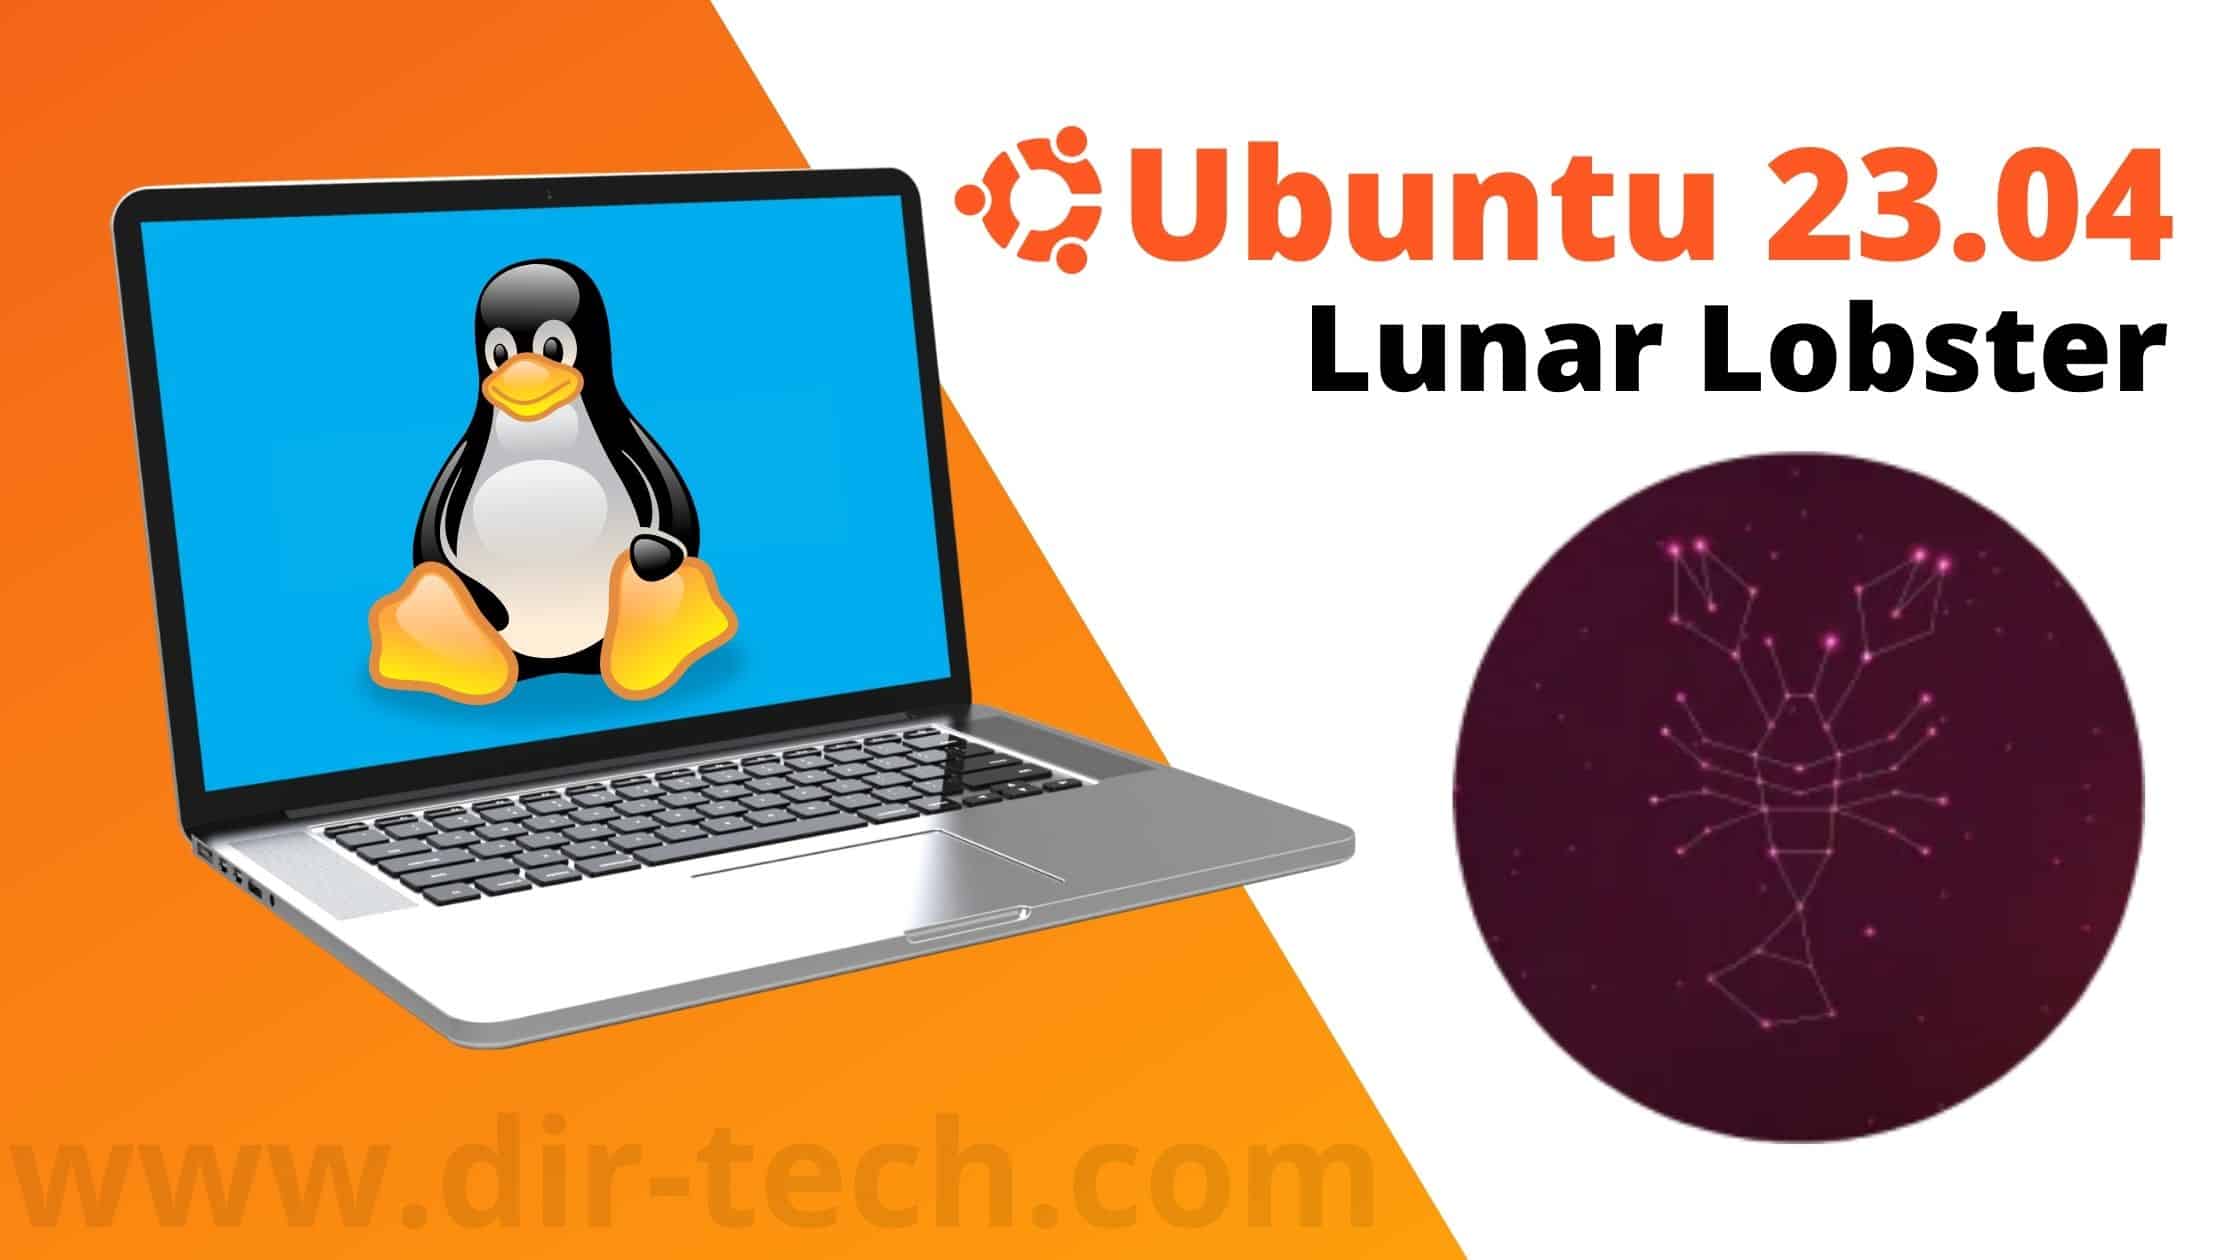 Read more about the article Canonical unveils Ubuntu 23.04 Lunar Lobster